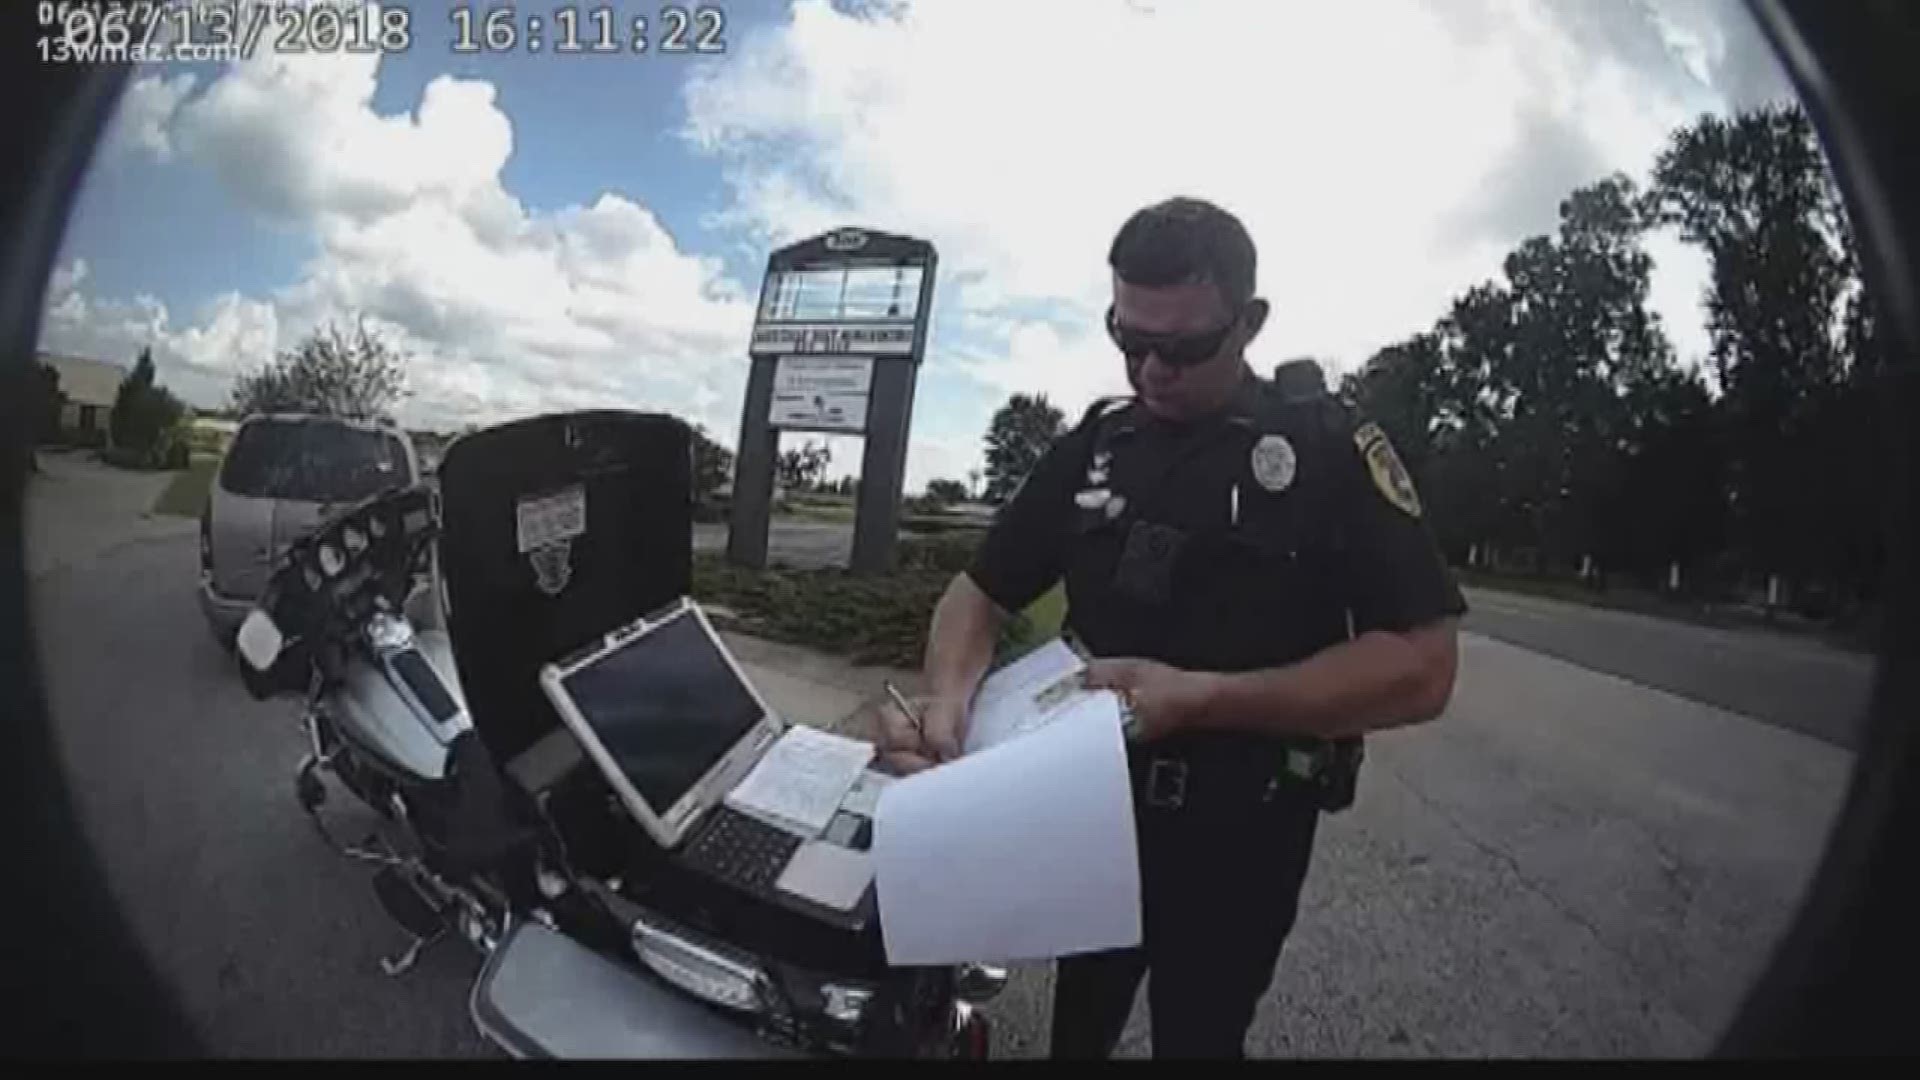 #13Investigates: Are Warner Robins police following their body cam rules?